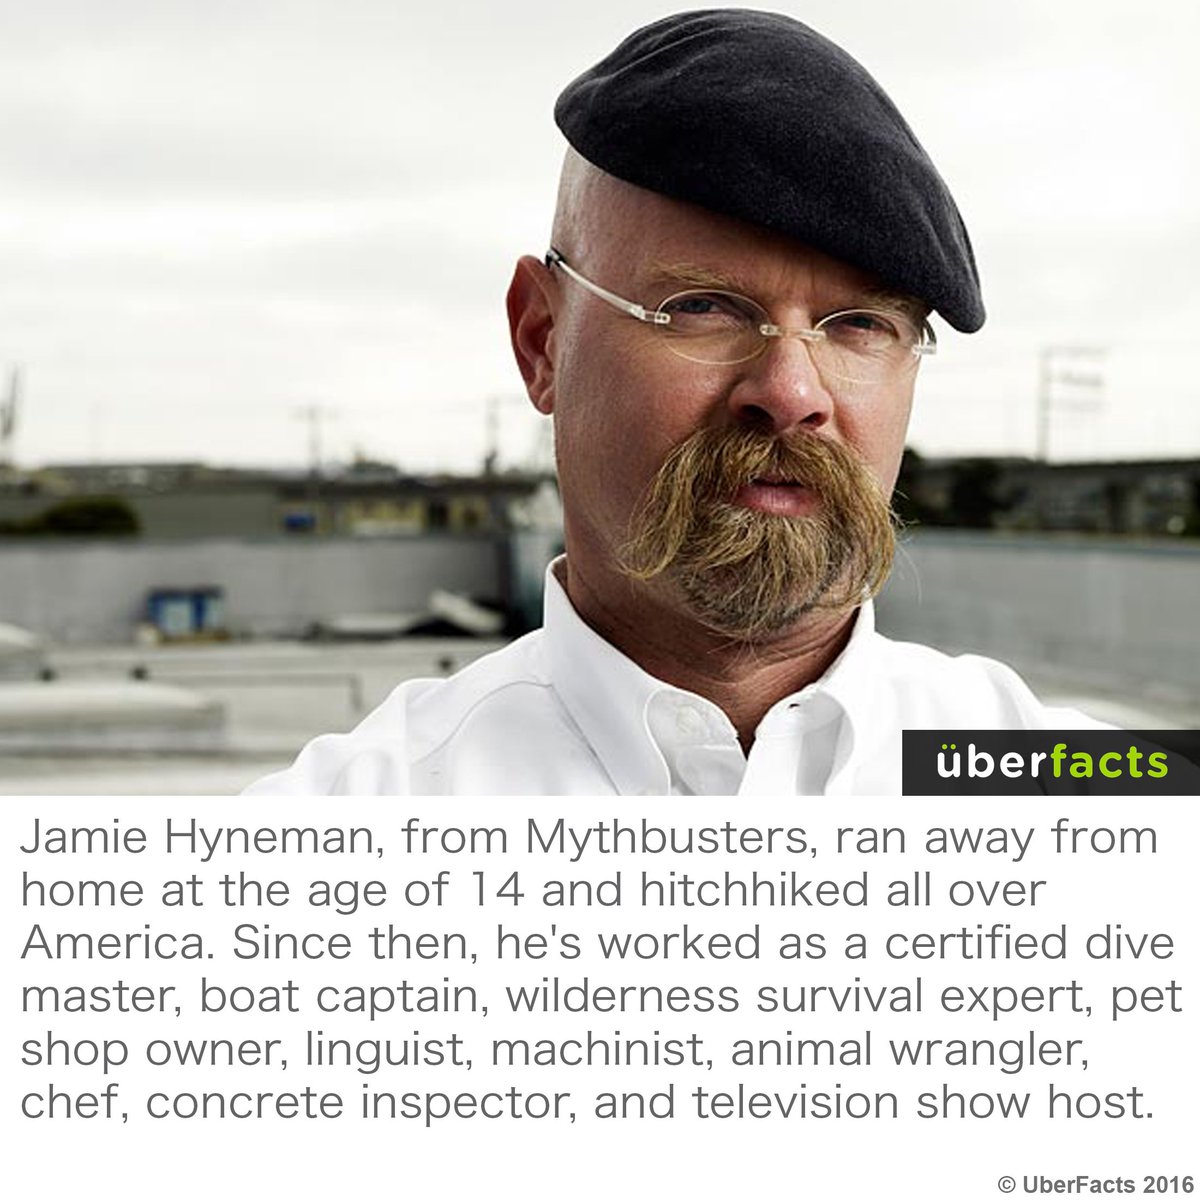 RT @UberFacts: He's been busy. https://t.co/T22Kq9jDw4